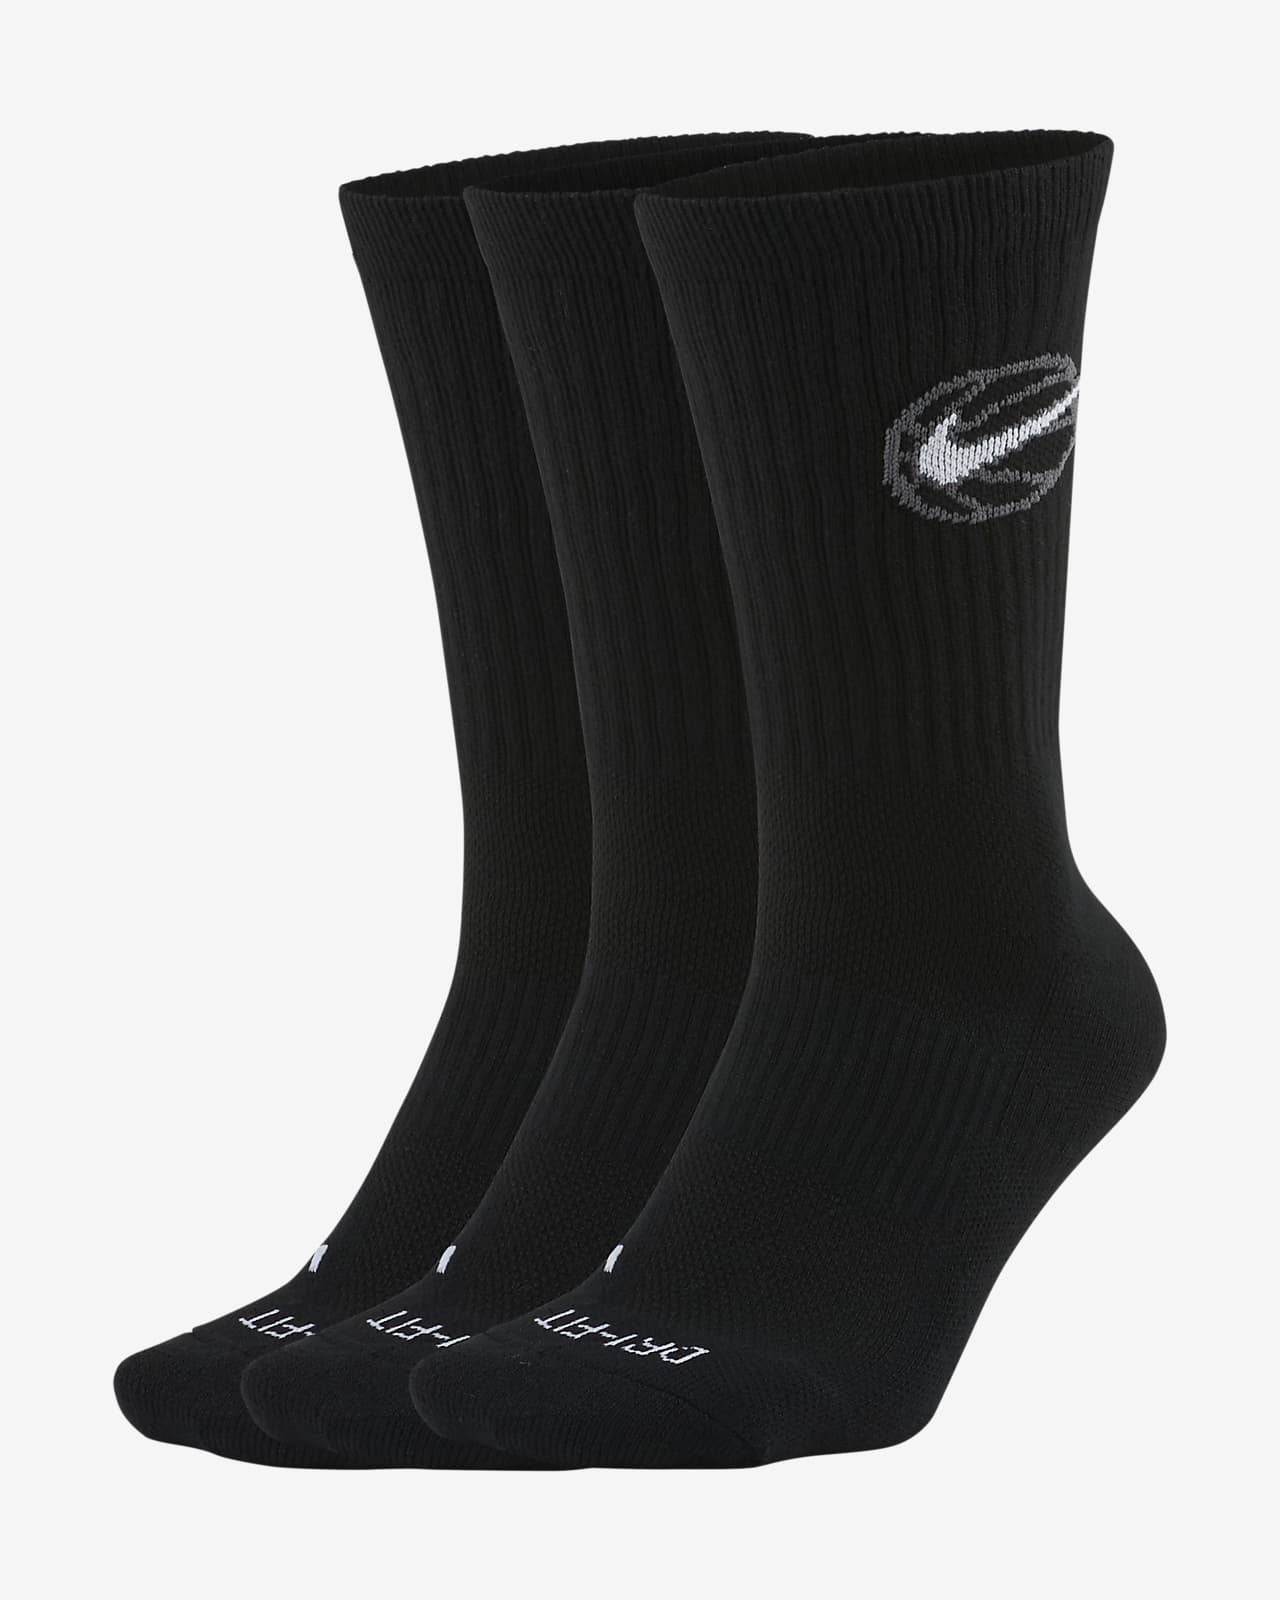 Chaussettes de basketball Nike Everyday Crew (3 paires)